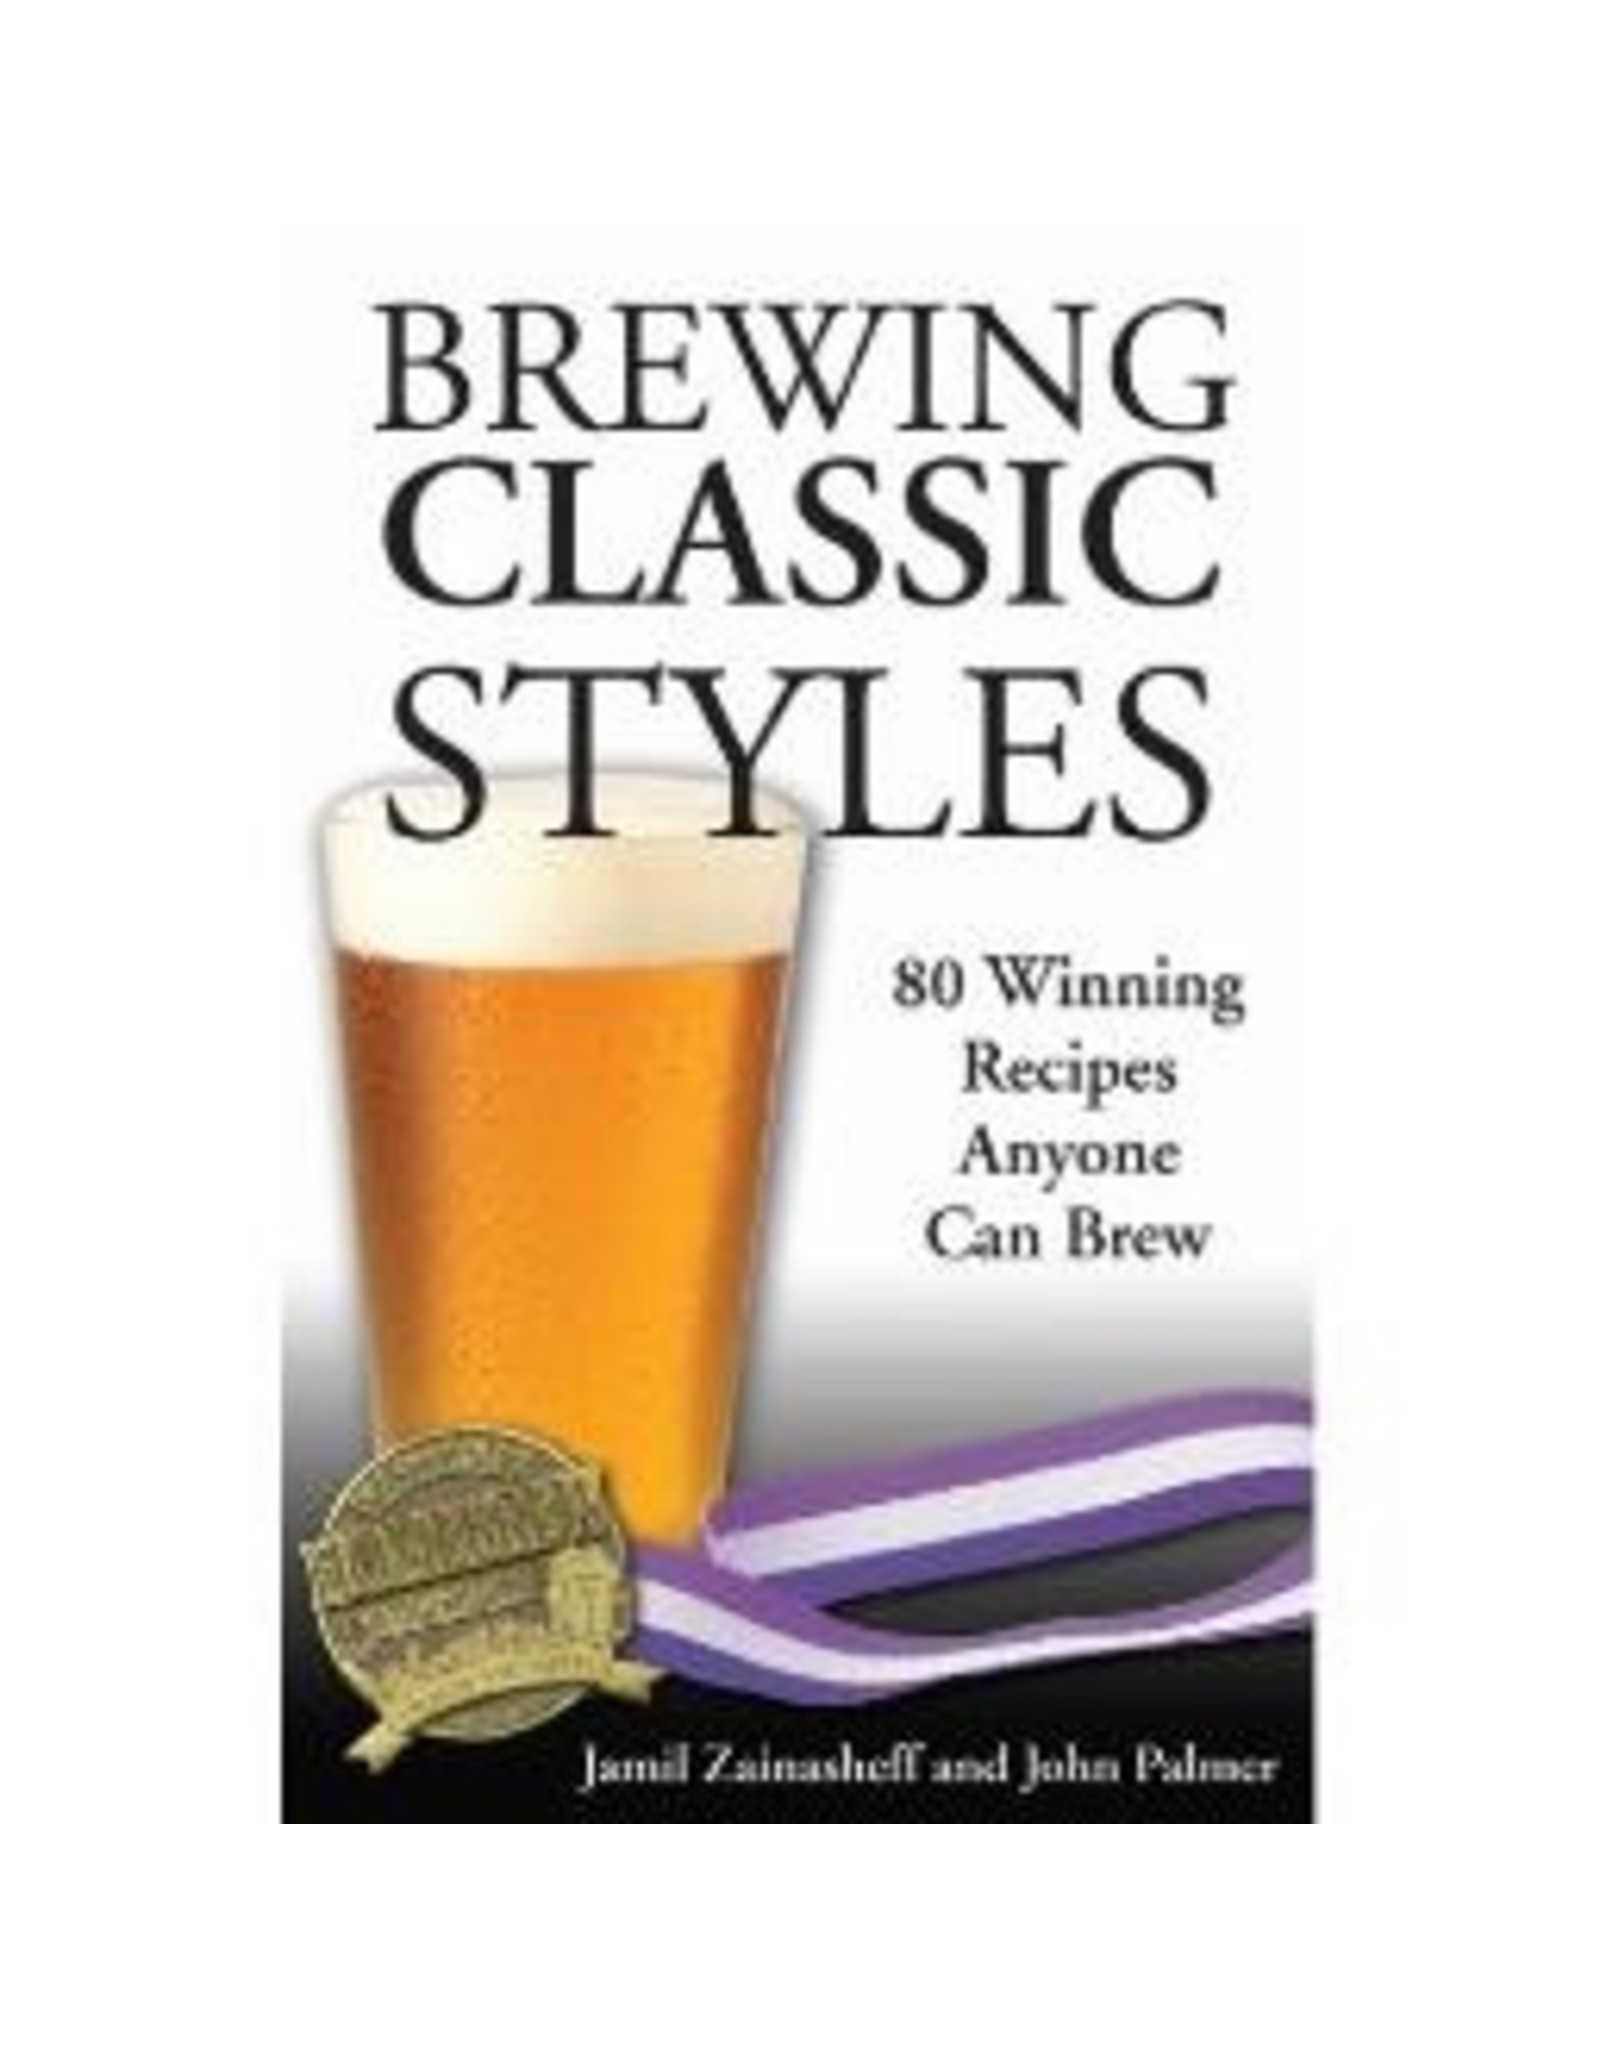 Brewing Classic Styles (book)